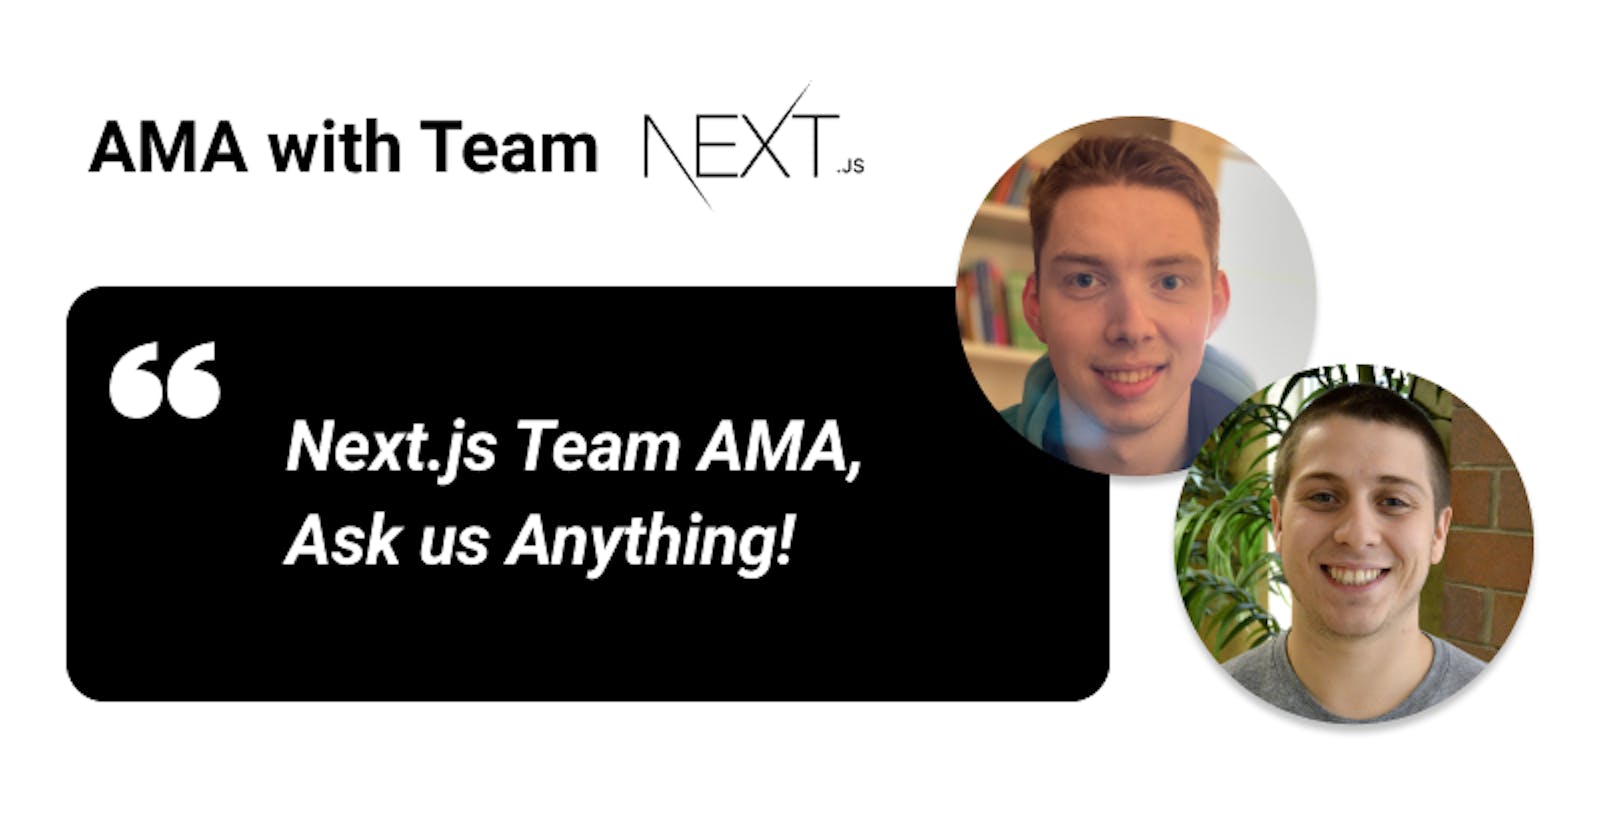 Next.js Team AMA, Ask us Anything!